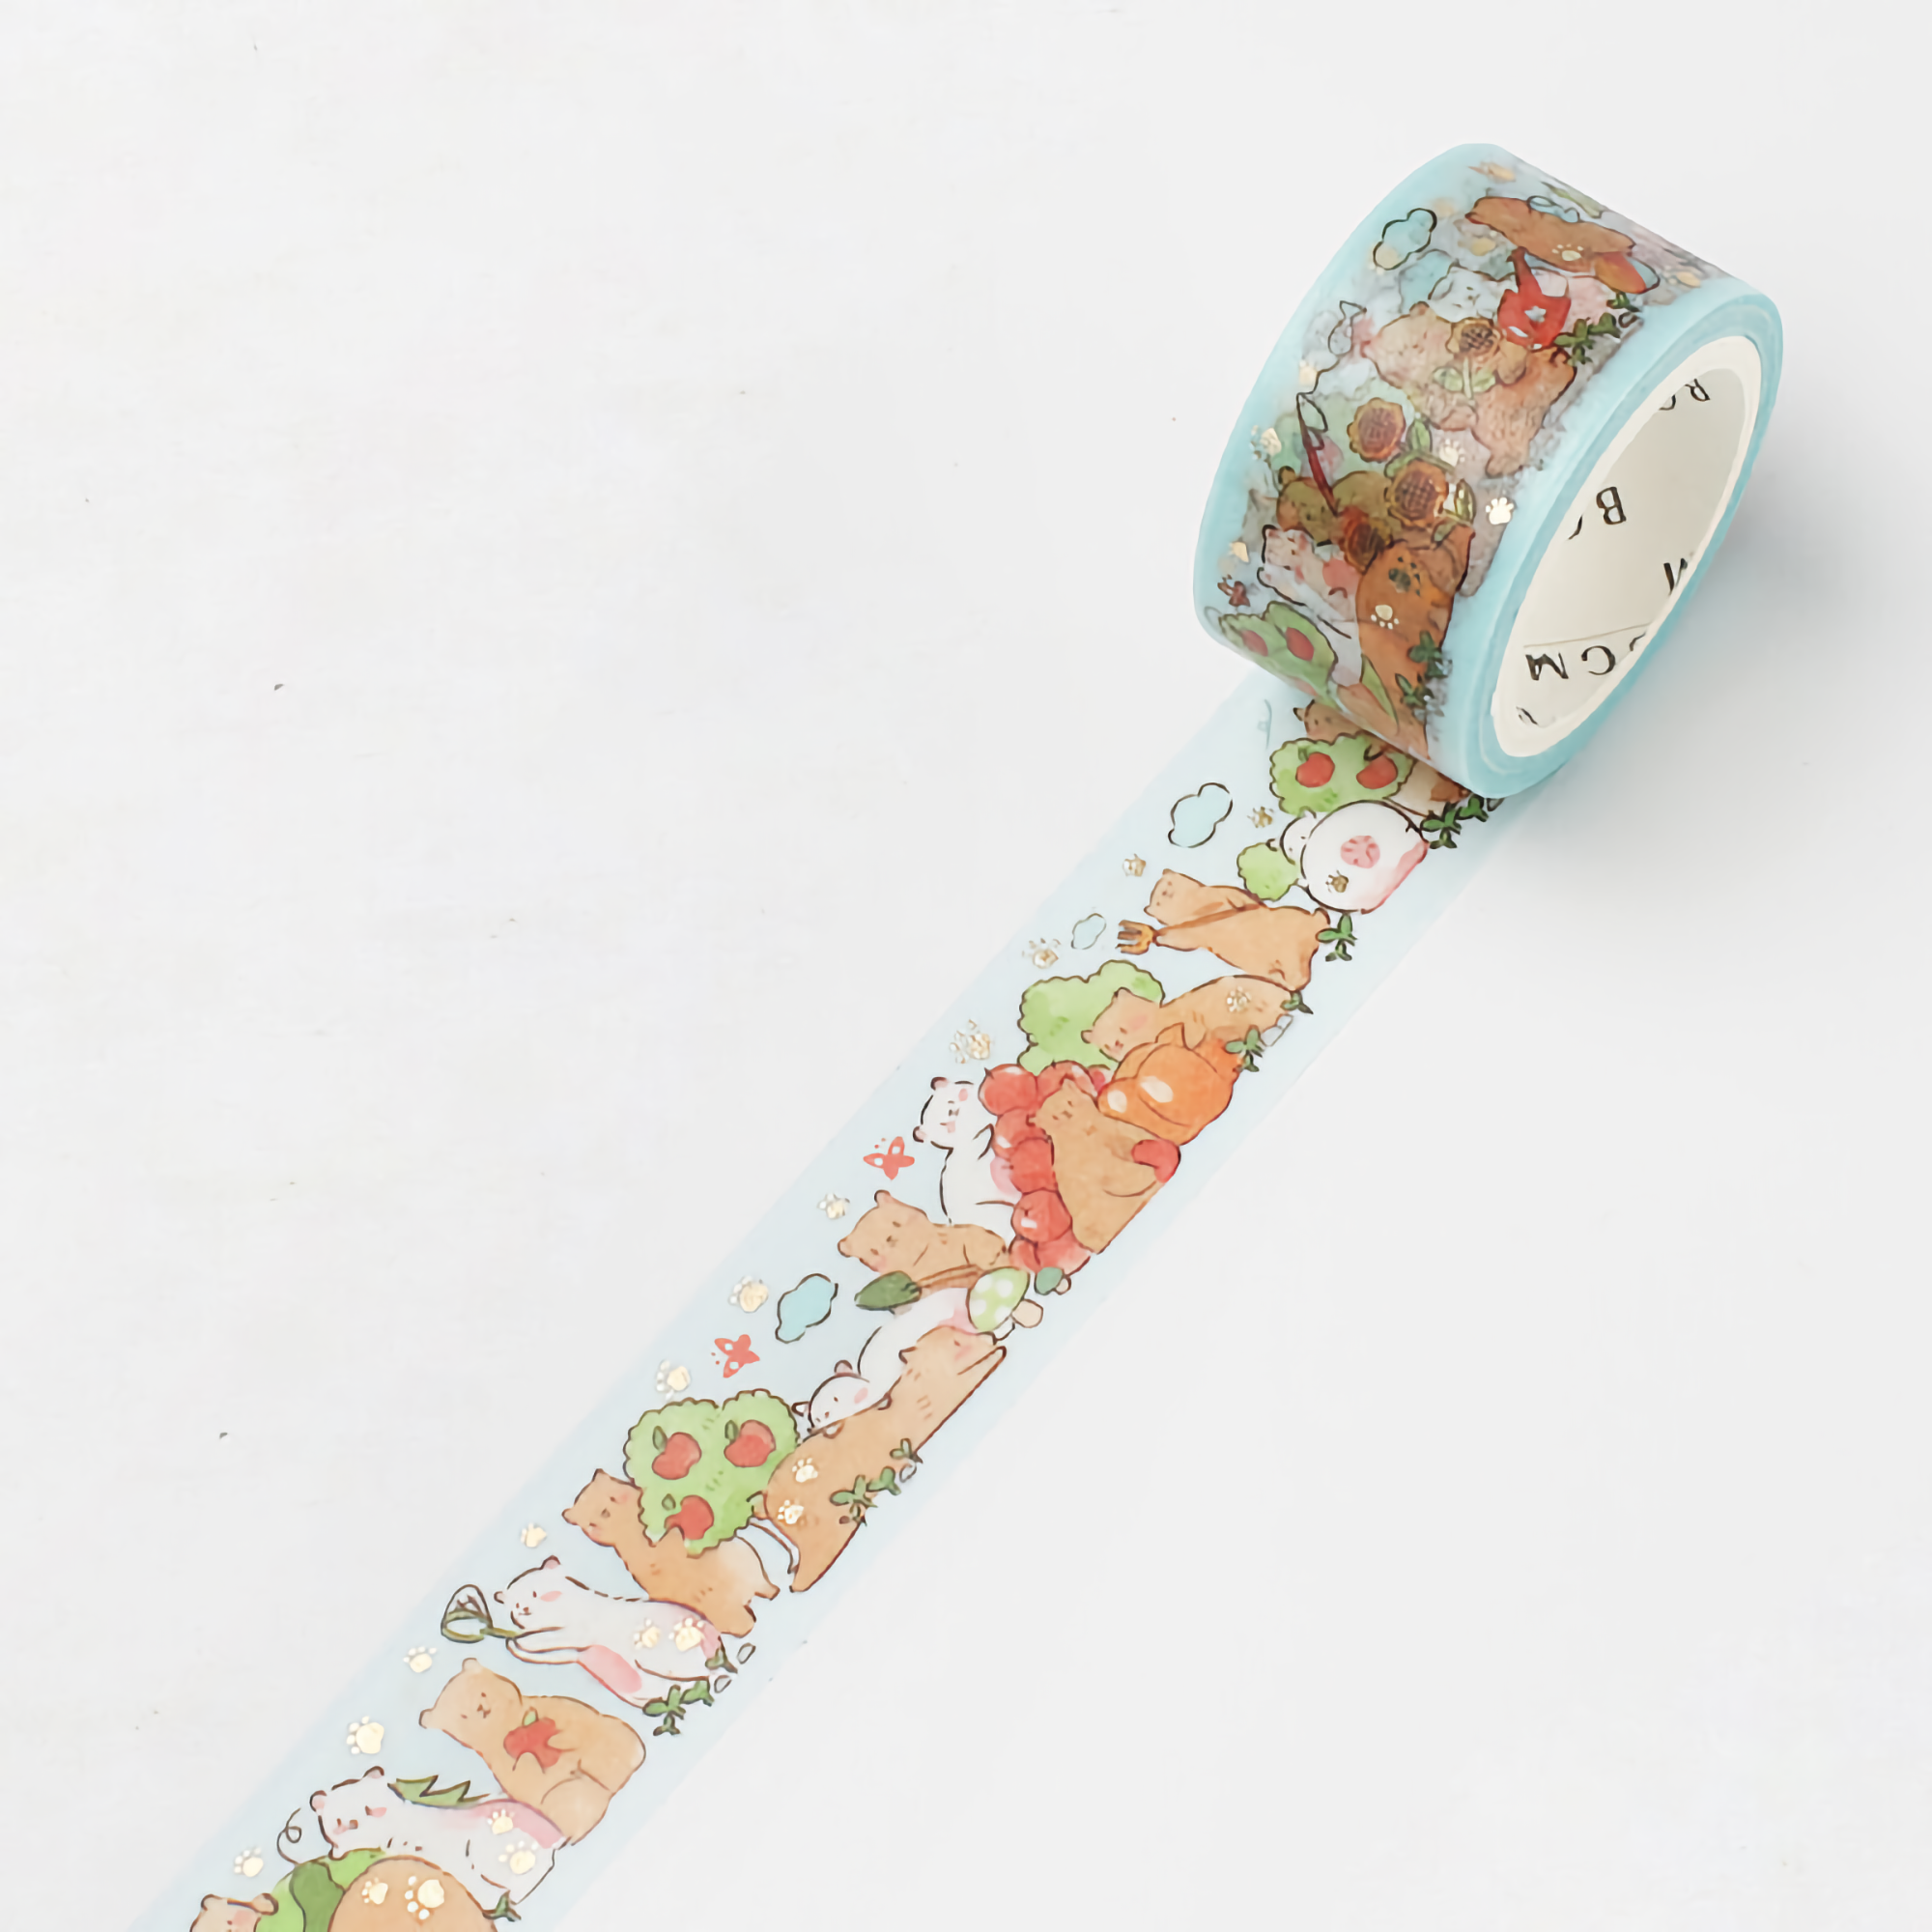 BGM Washi Tape Special Foil Animal Party Forest 20 mm